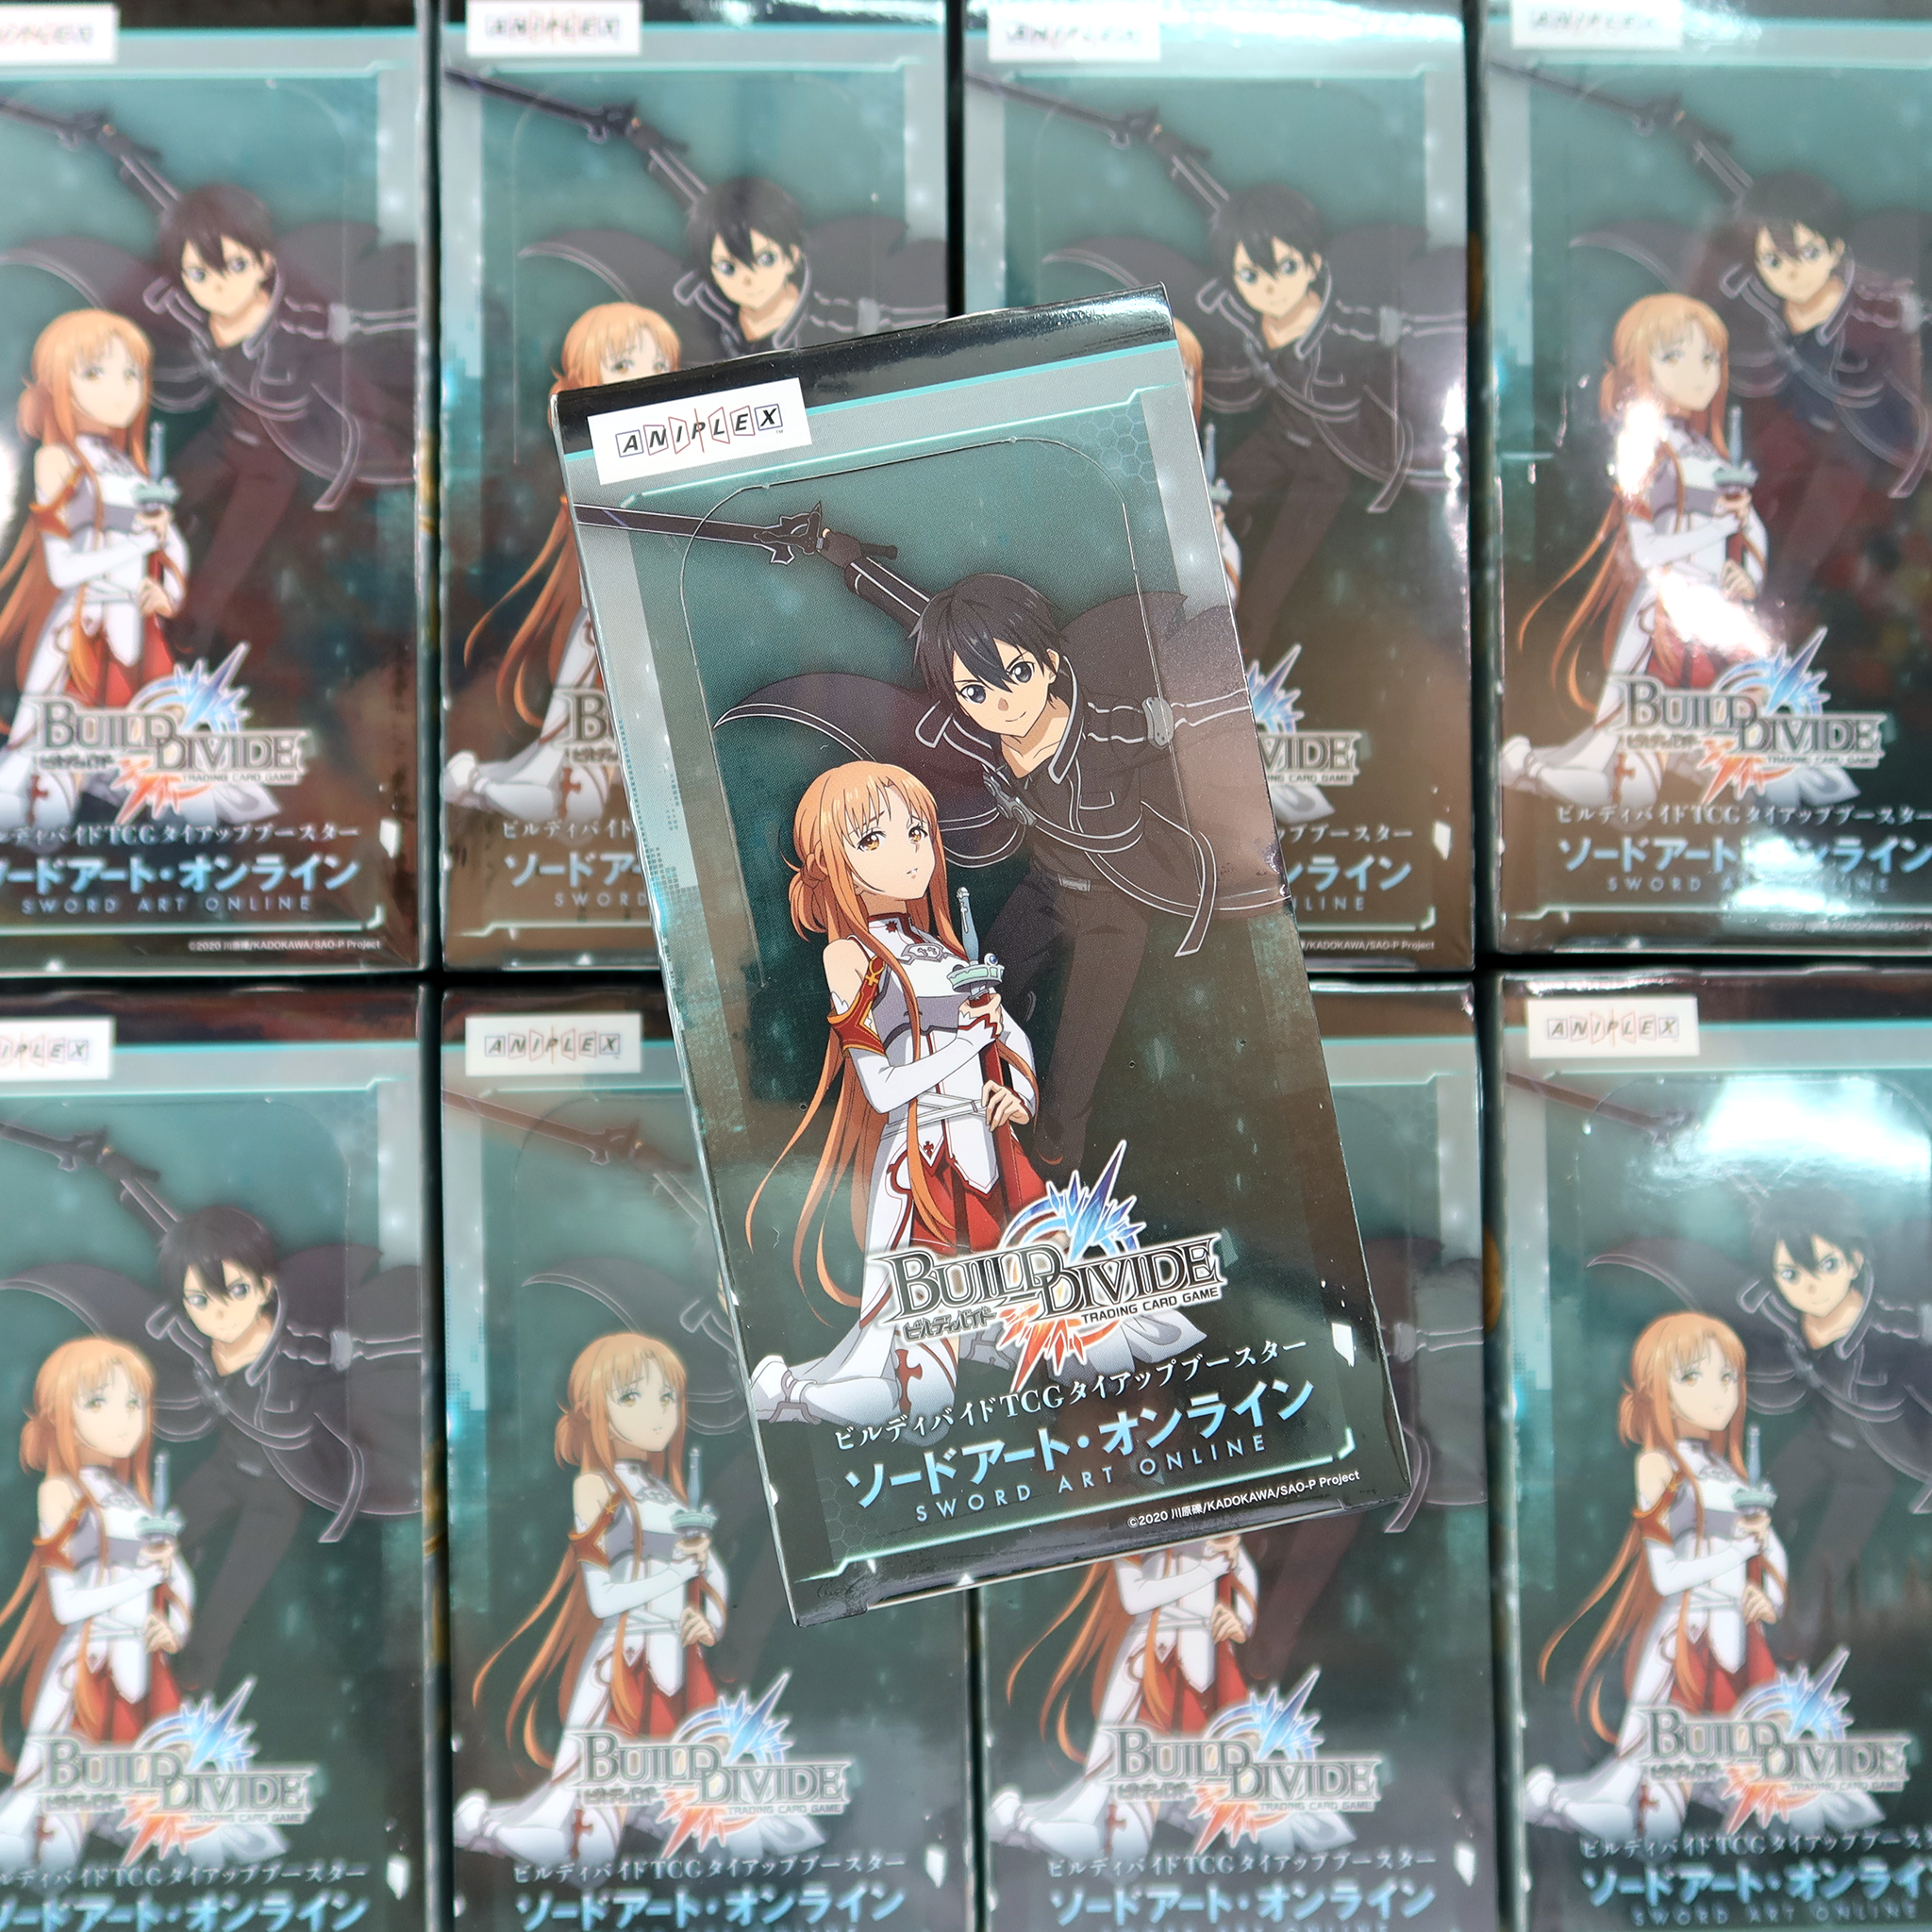 Sword Art Online is Coming to Union Arena, a new TCG from Bandai